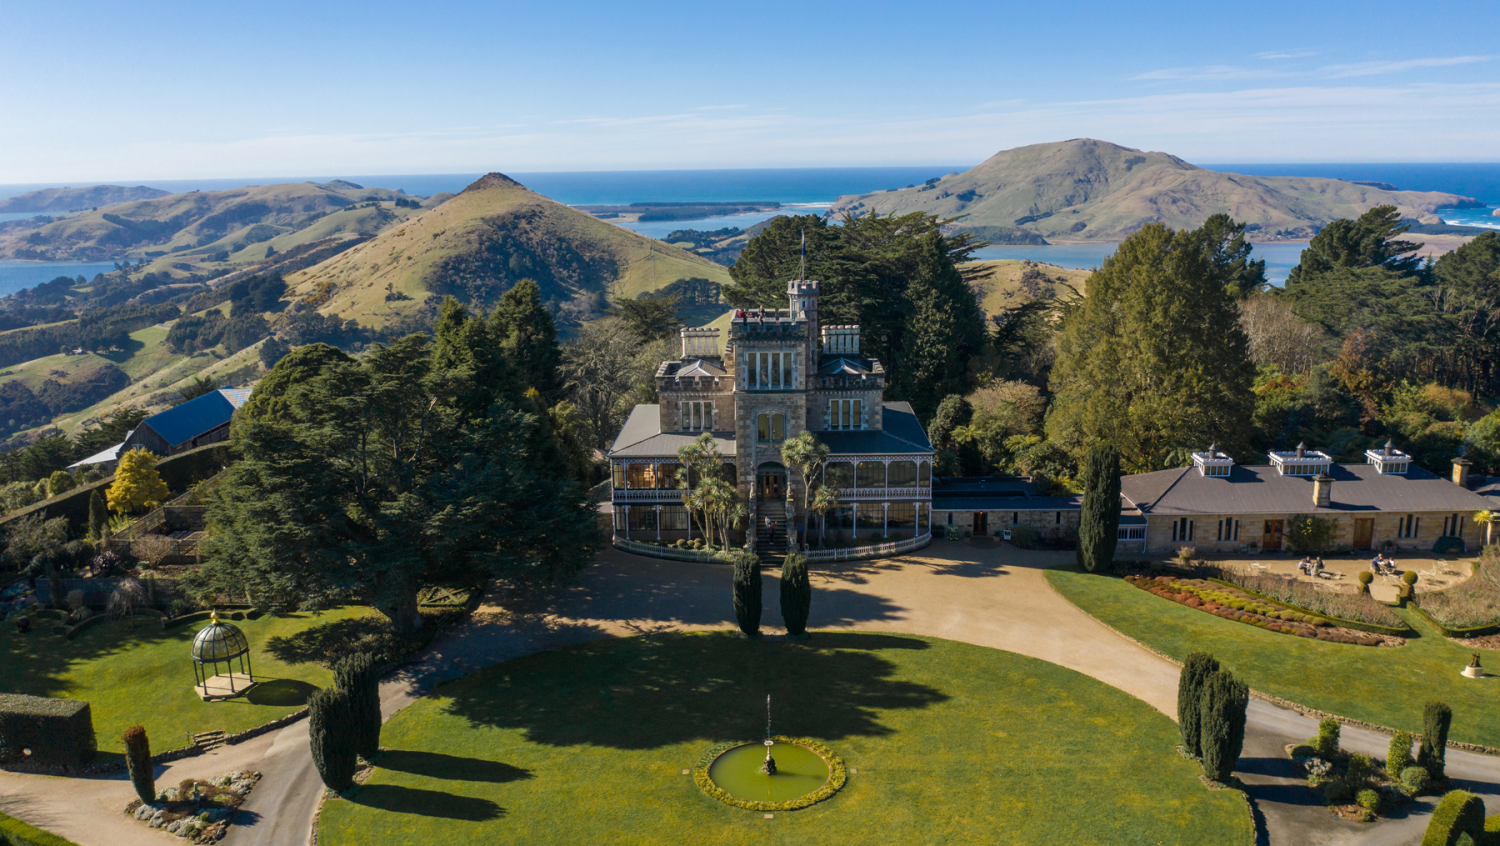 Image 1 for Experience historic Larnach Castle